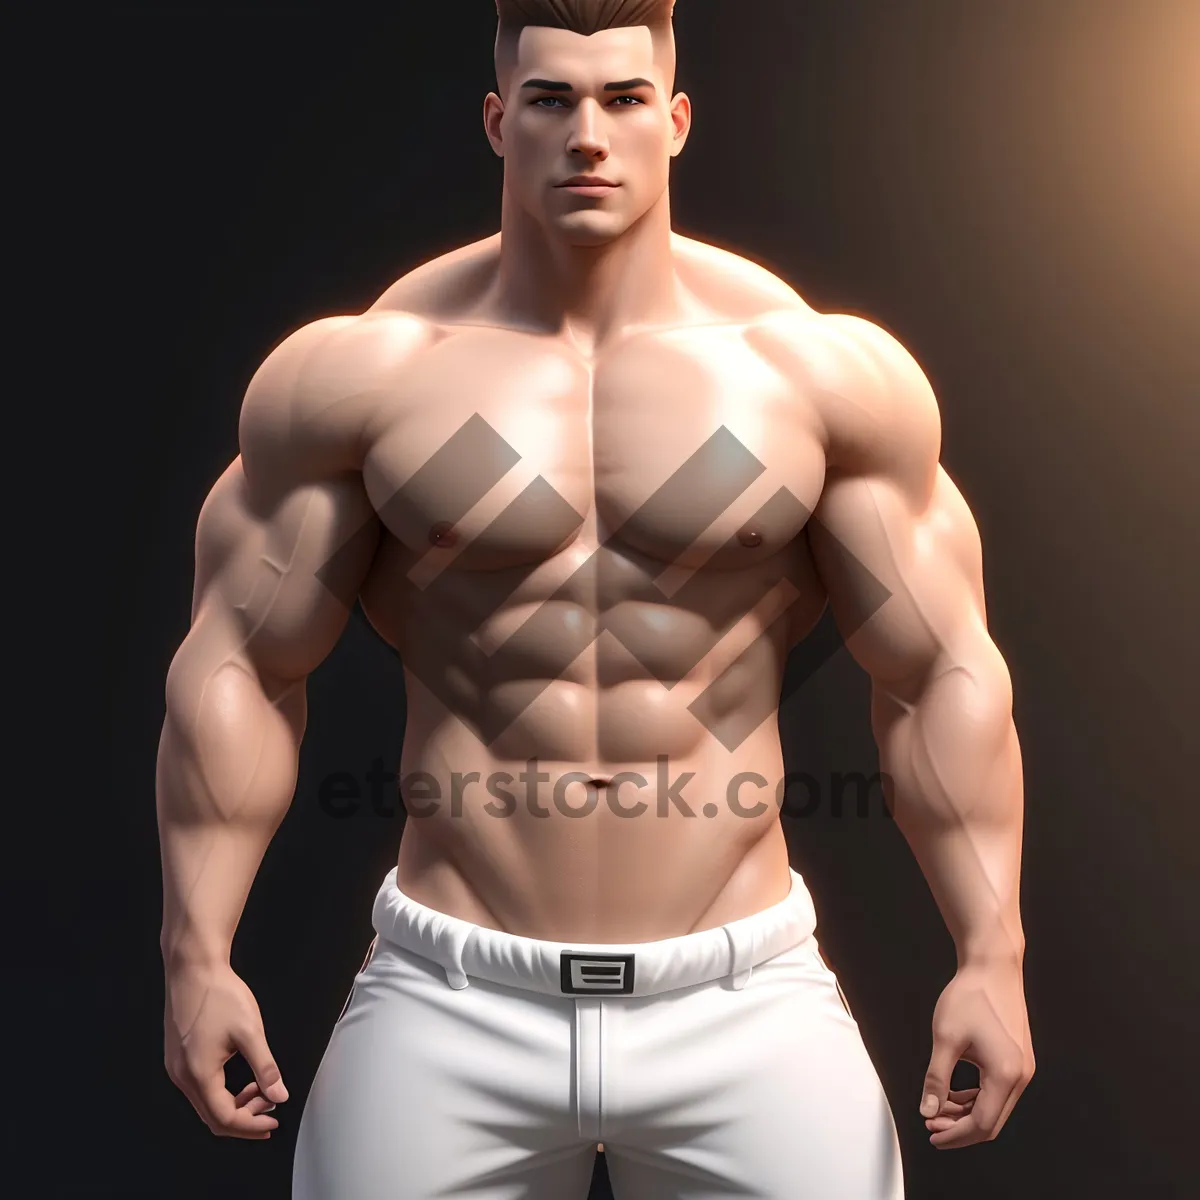 Picture of Muscular shirtless man showcasing his ripped abs